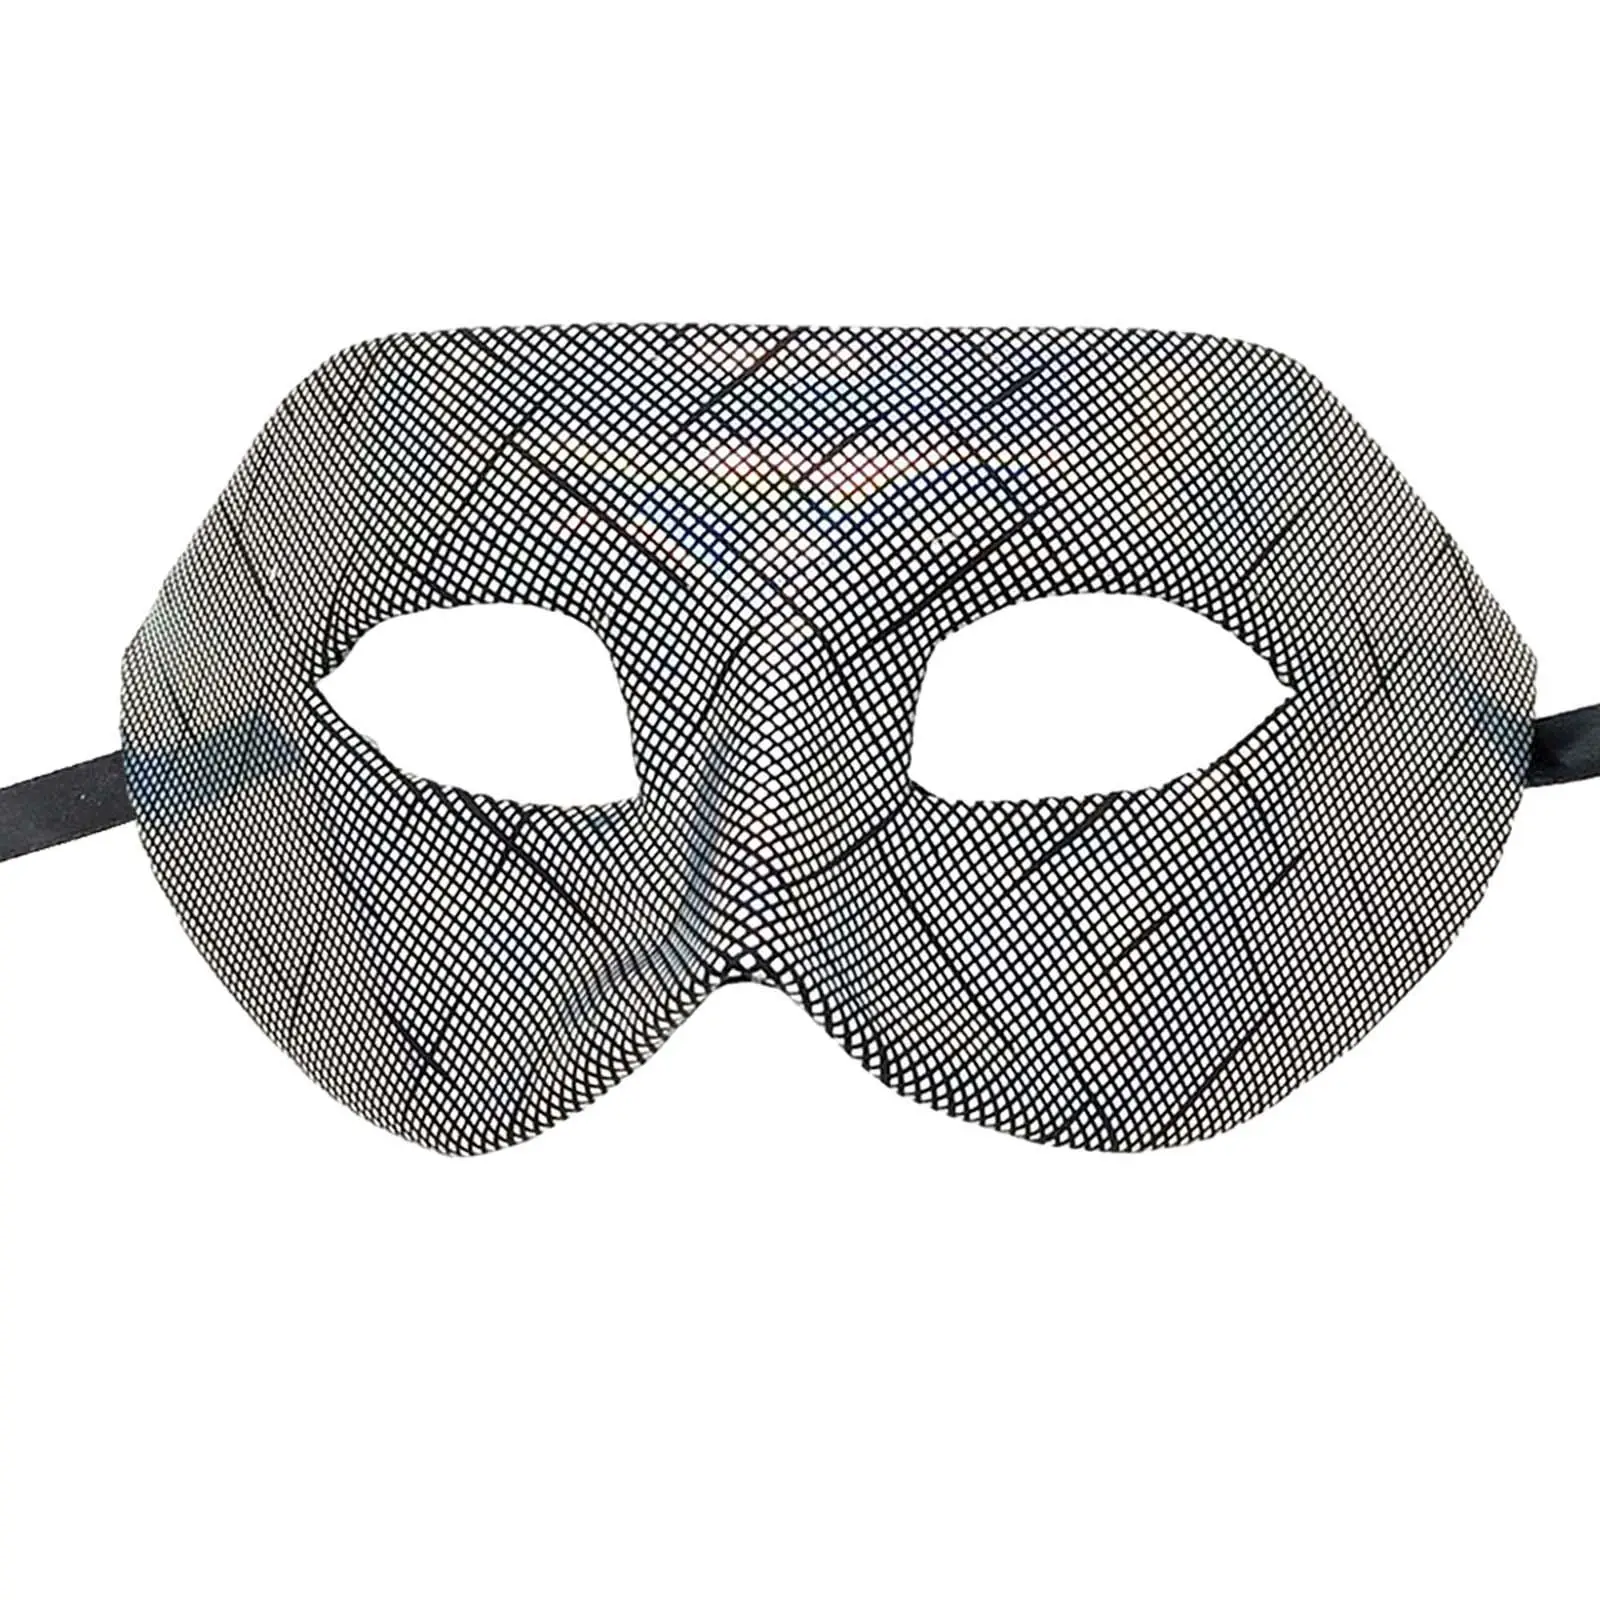 Masquerade Mask Cosplay Props for Fancy Dress Stage Performance Halloween